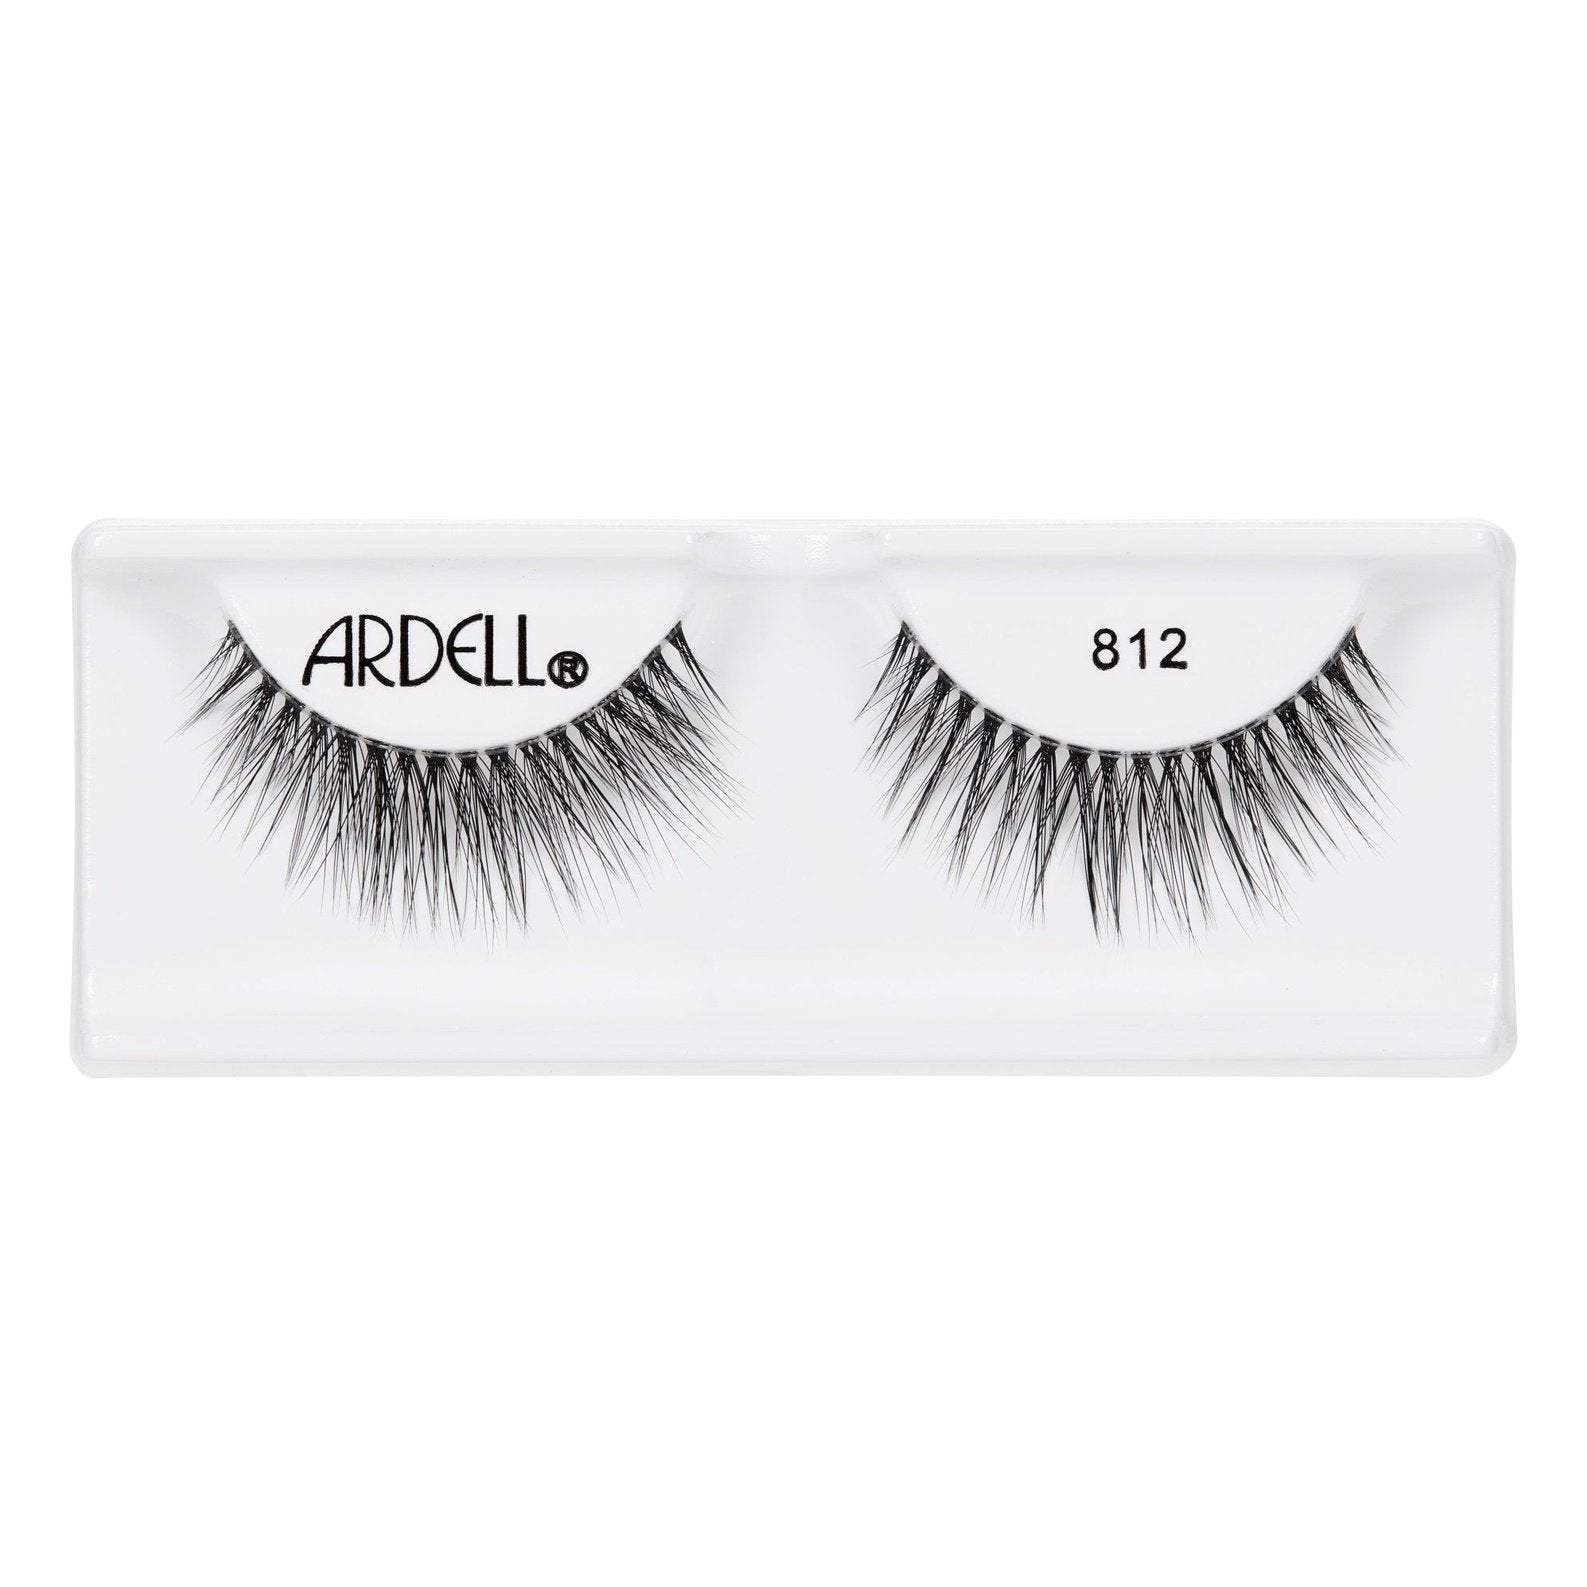 Ardell 812 Black Faux Mink Lashes-Ardell-ARD_Natural,Brand_Ardell,Collection_Makeup,Makeup_Eye,Makeup_Faux Lashes